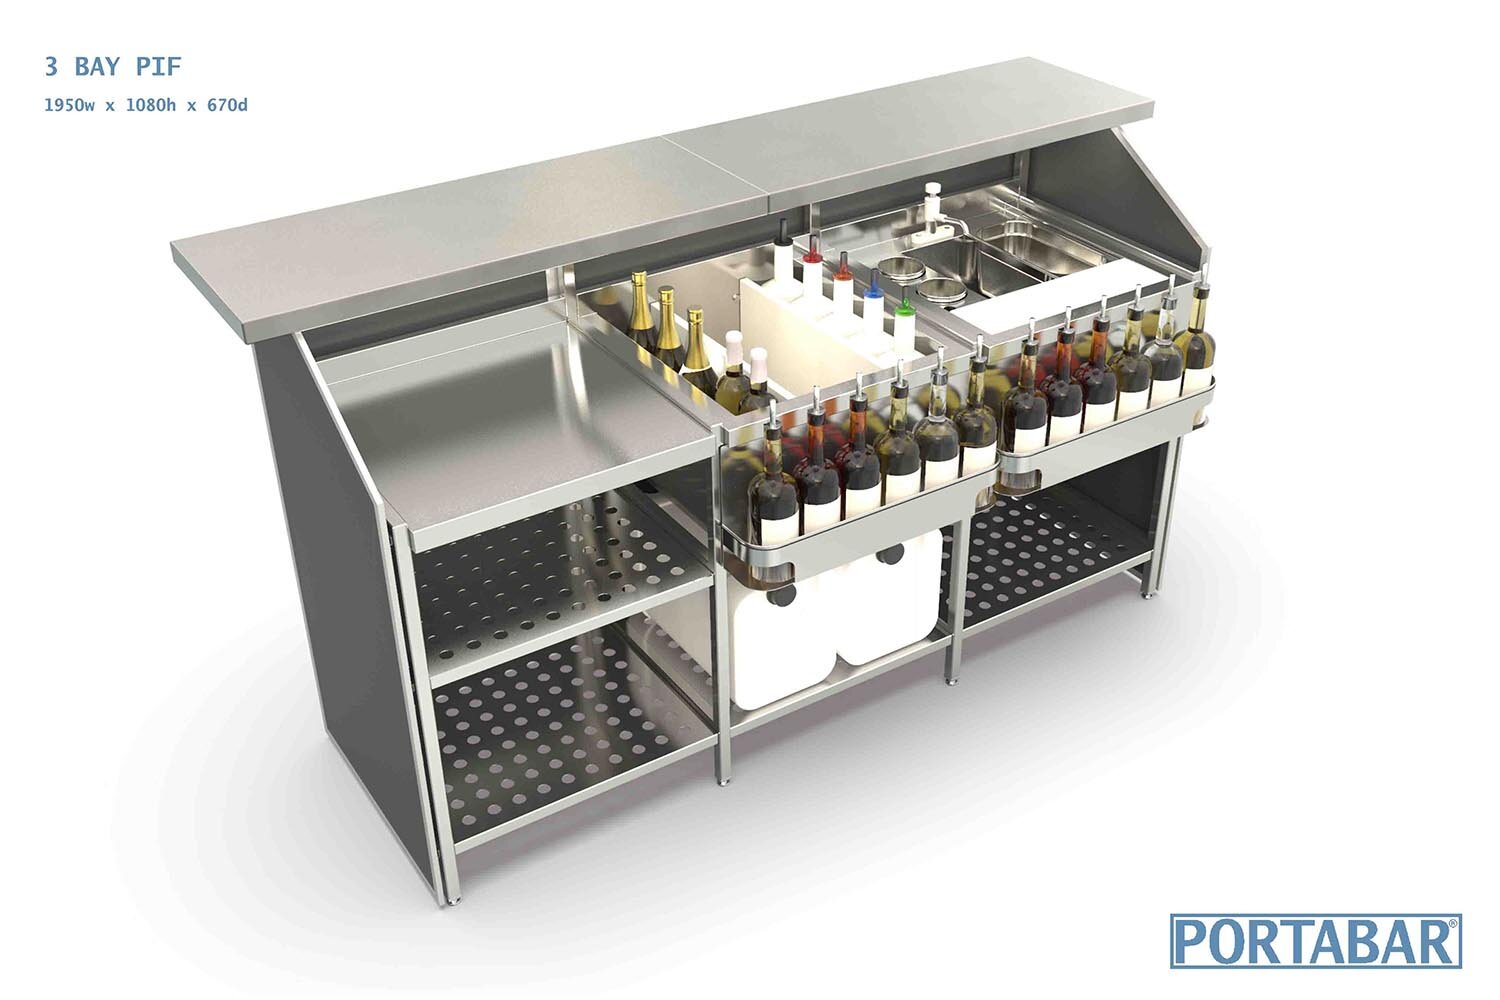 Foldable Mobile Bars by Portabar